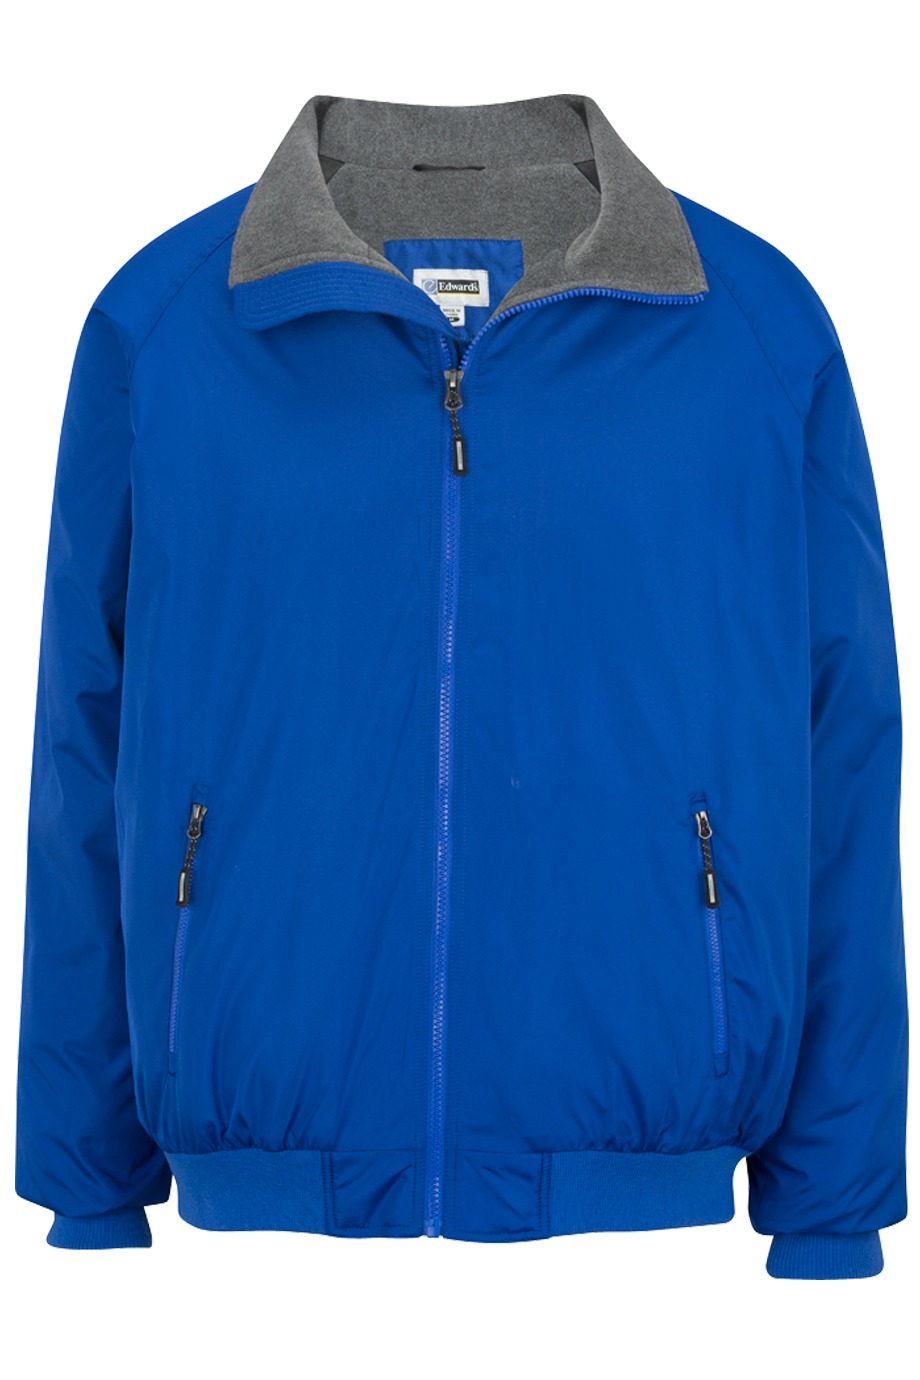 click to view ROYAL BLUE w/CHARCOAL HEATHER FLEECE